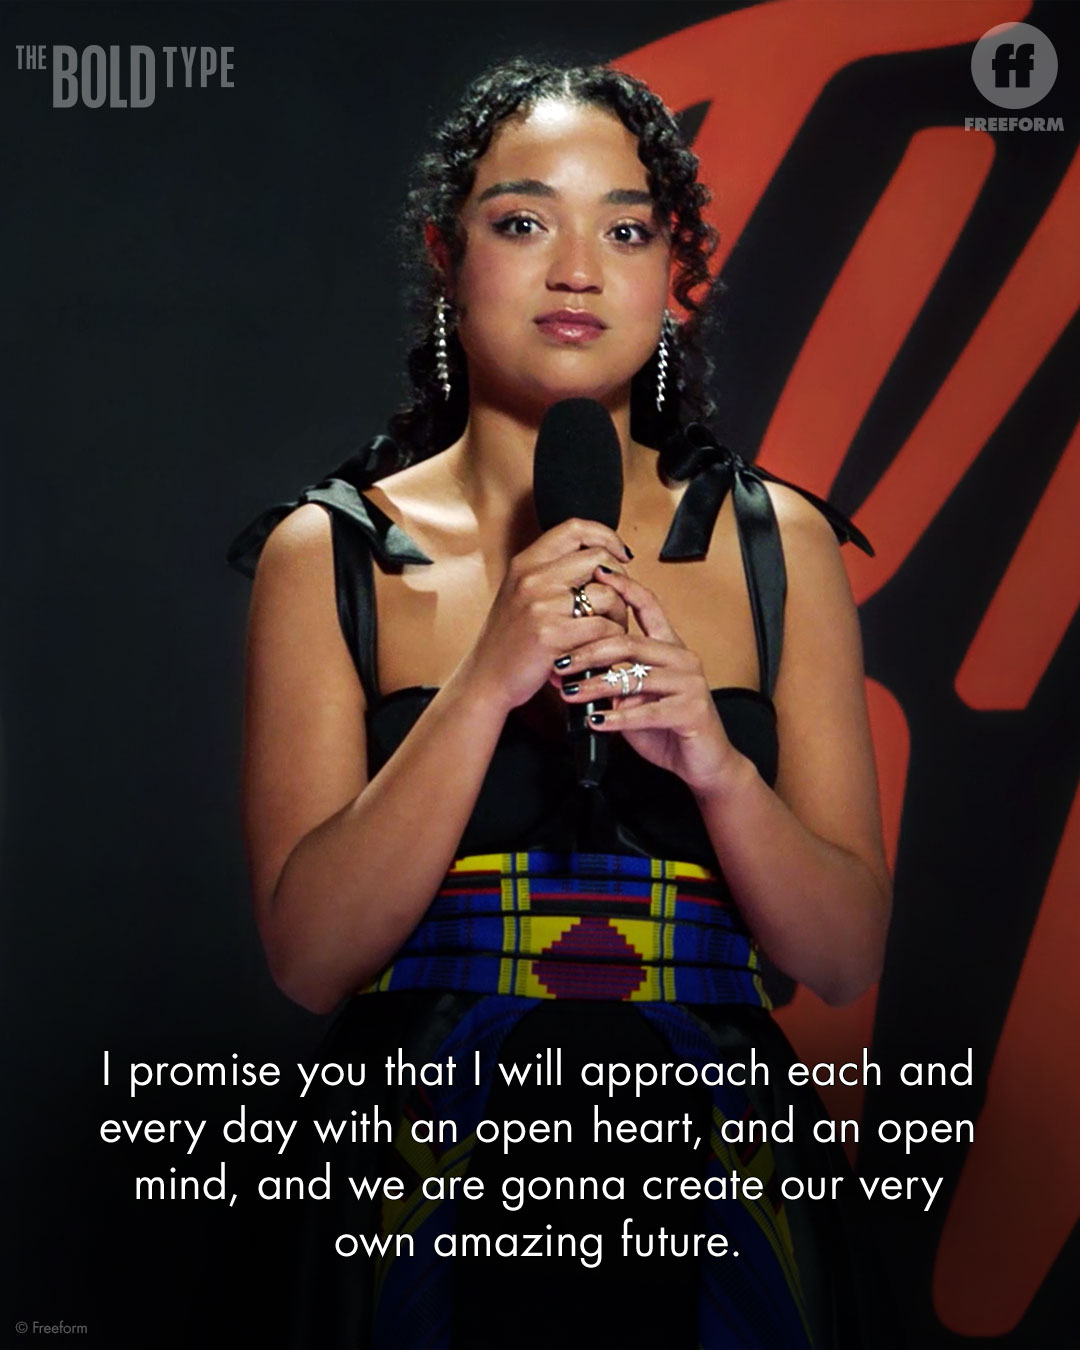 Kat Edison stands on a stage with a microphone. Text reads: I promise you that I will approach each and every day with an open heart, and an open mind, and we are gonna create our very own amazing future.